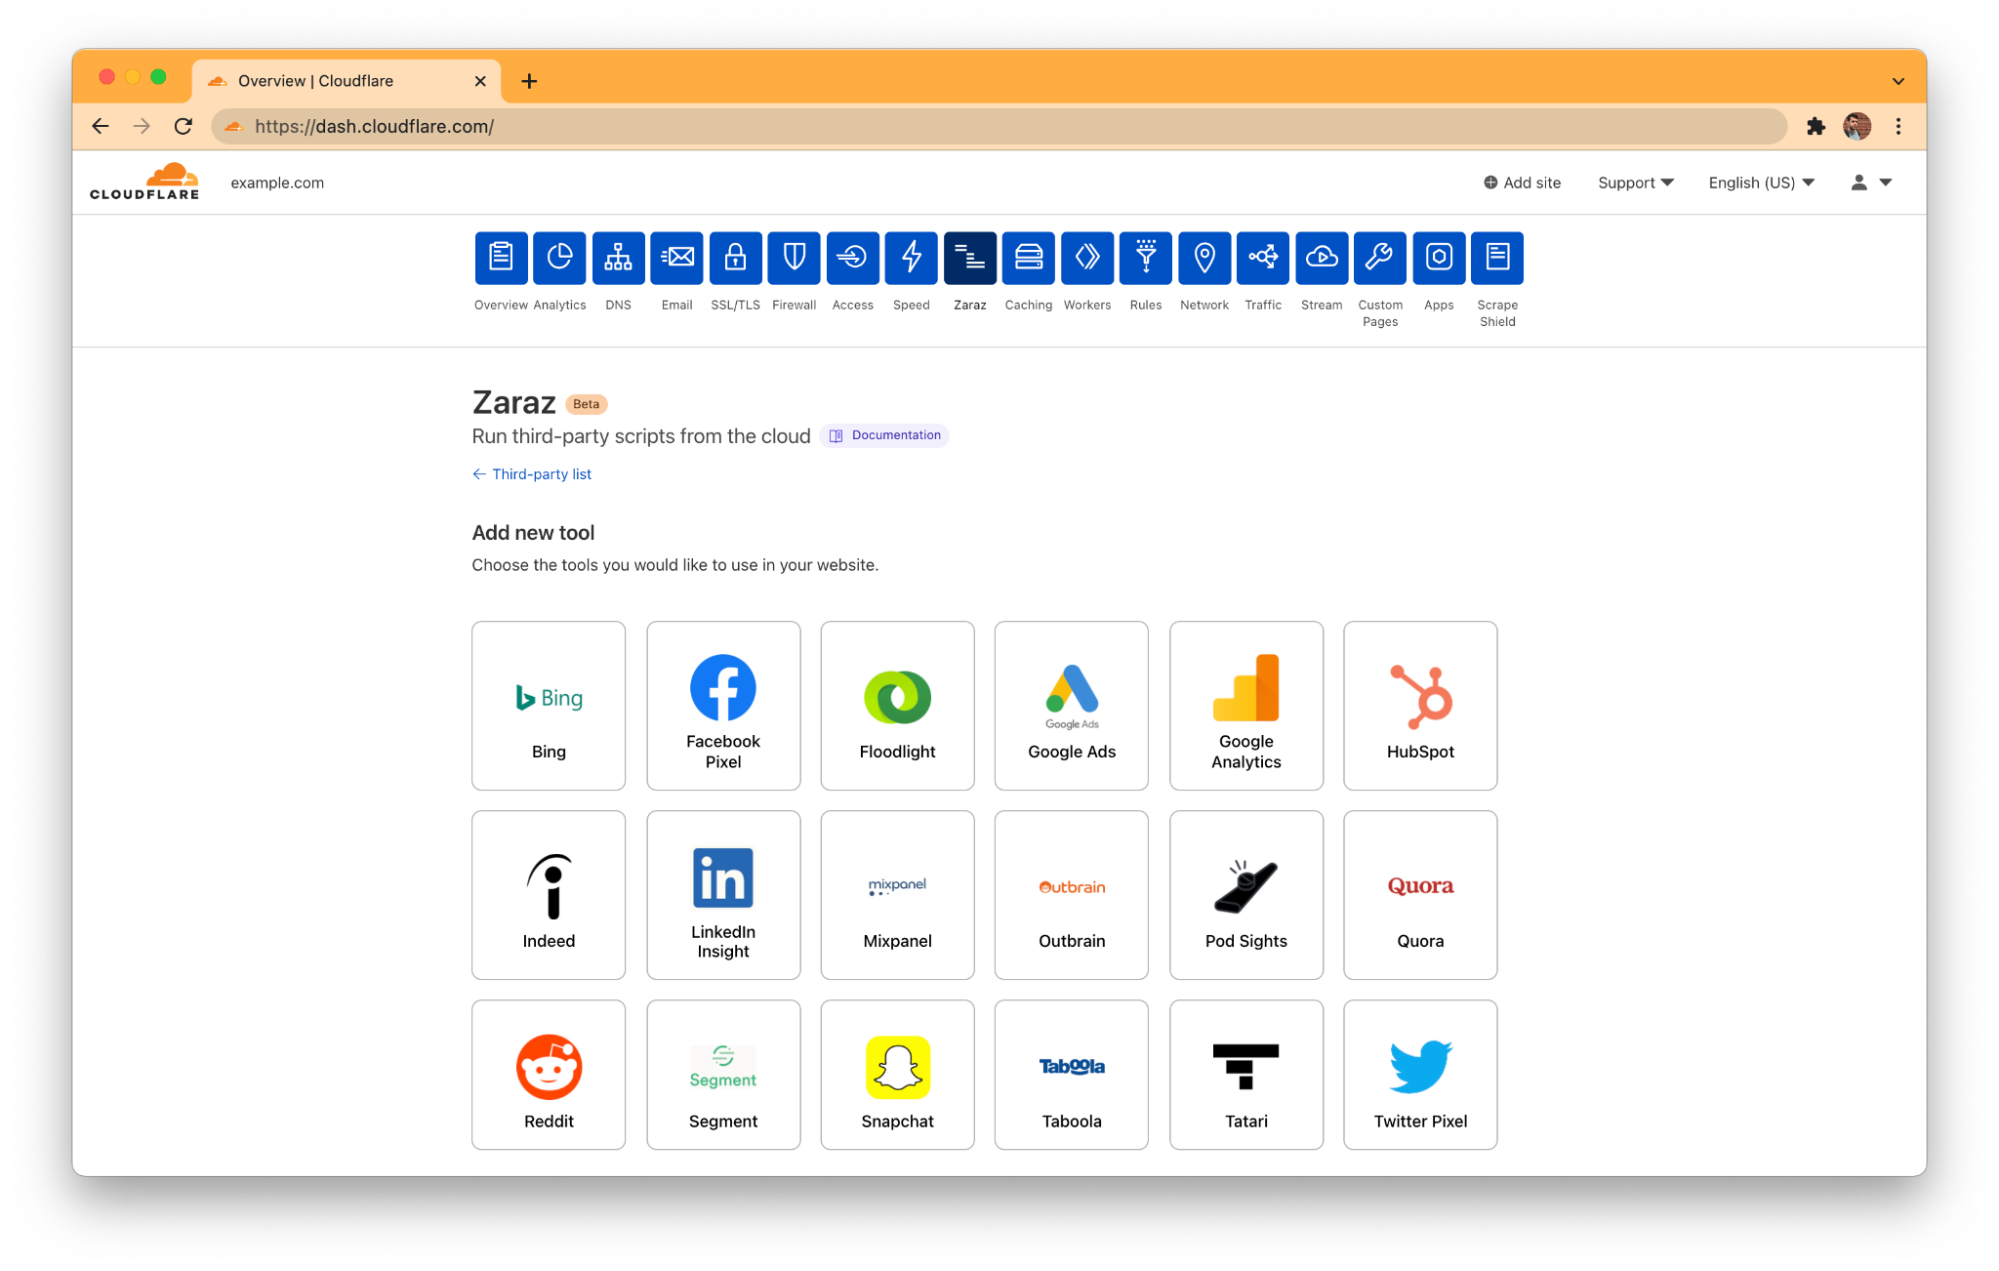 Cloudflare acquires Zaraz to enable cloud loading of third-party tools